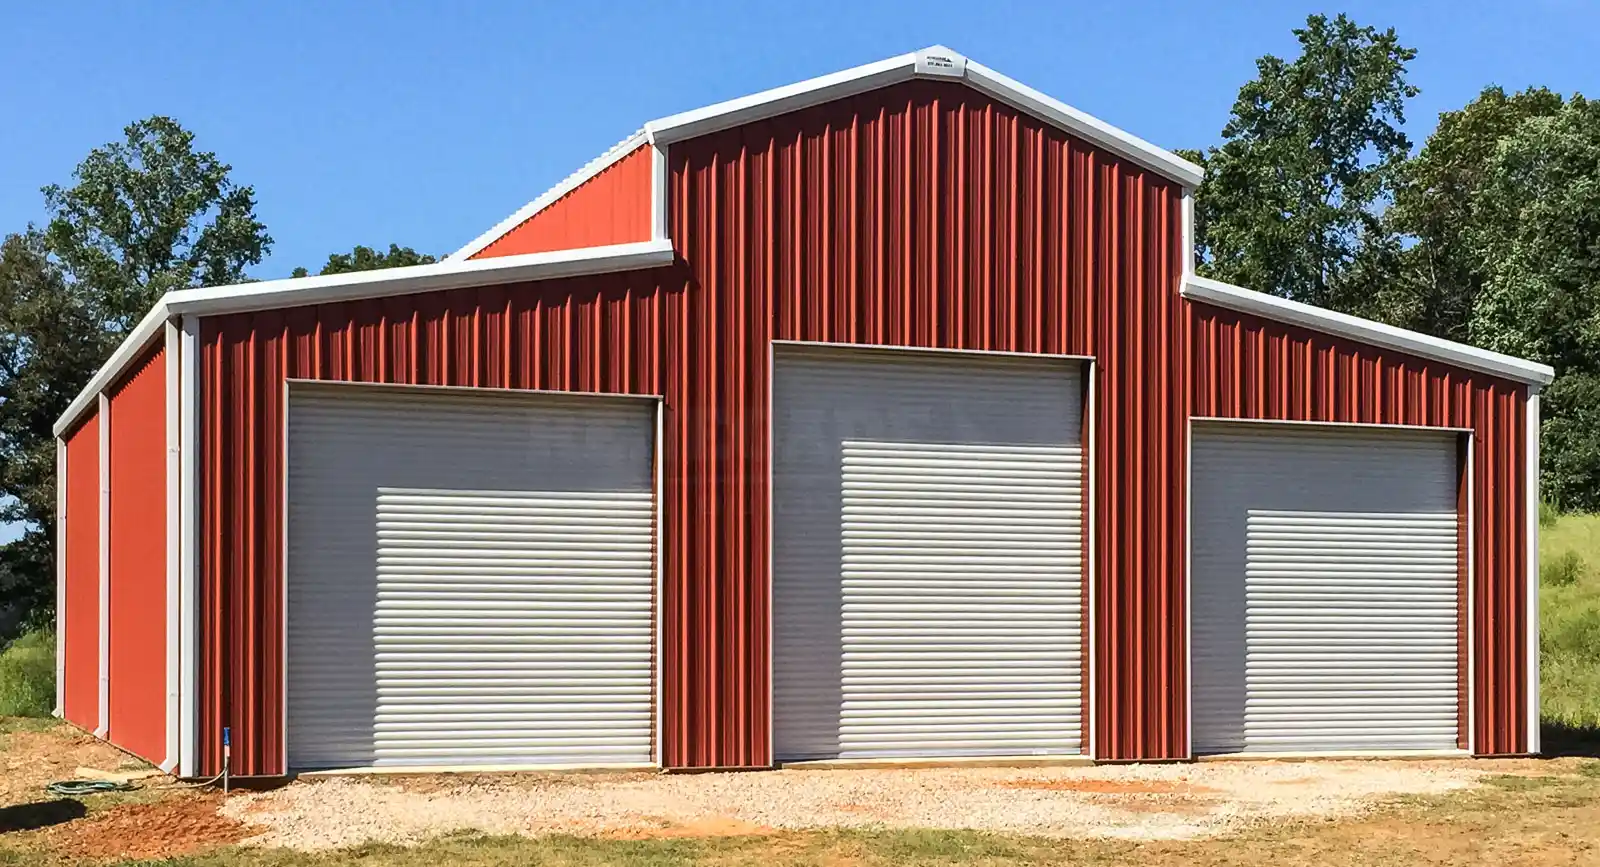 50x50 steel farm building with traditional red siding and white trim